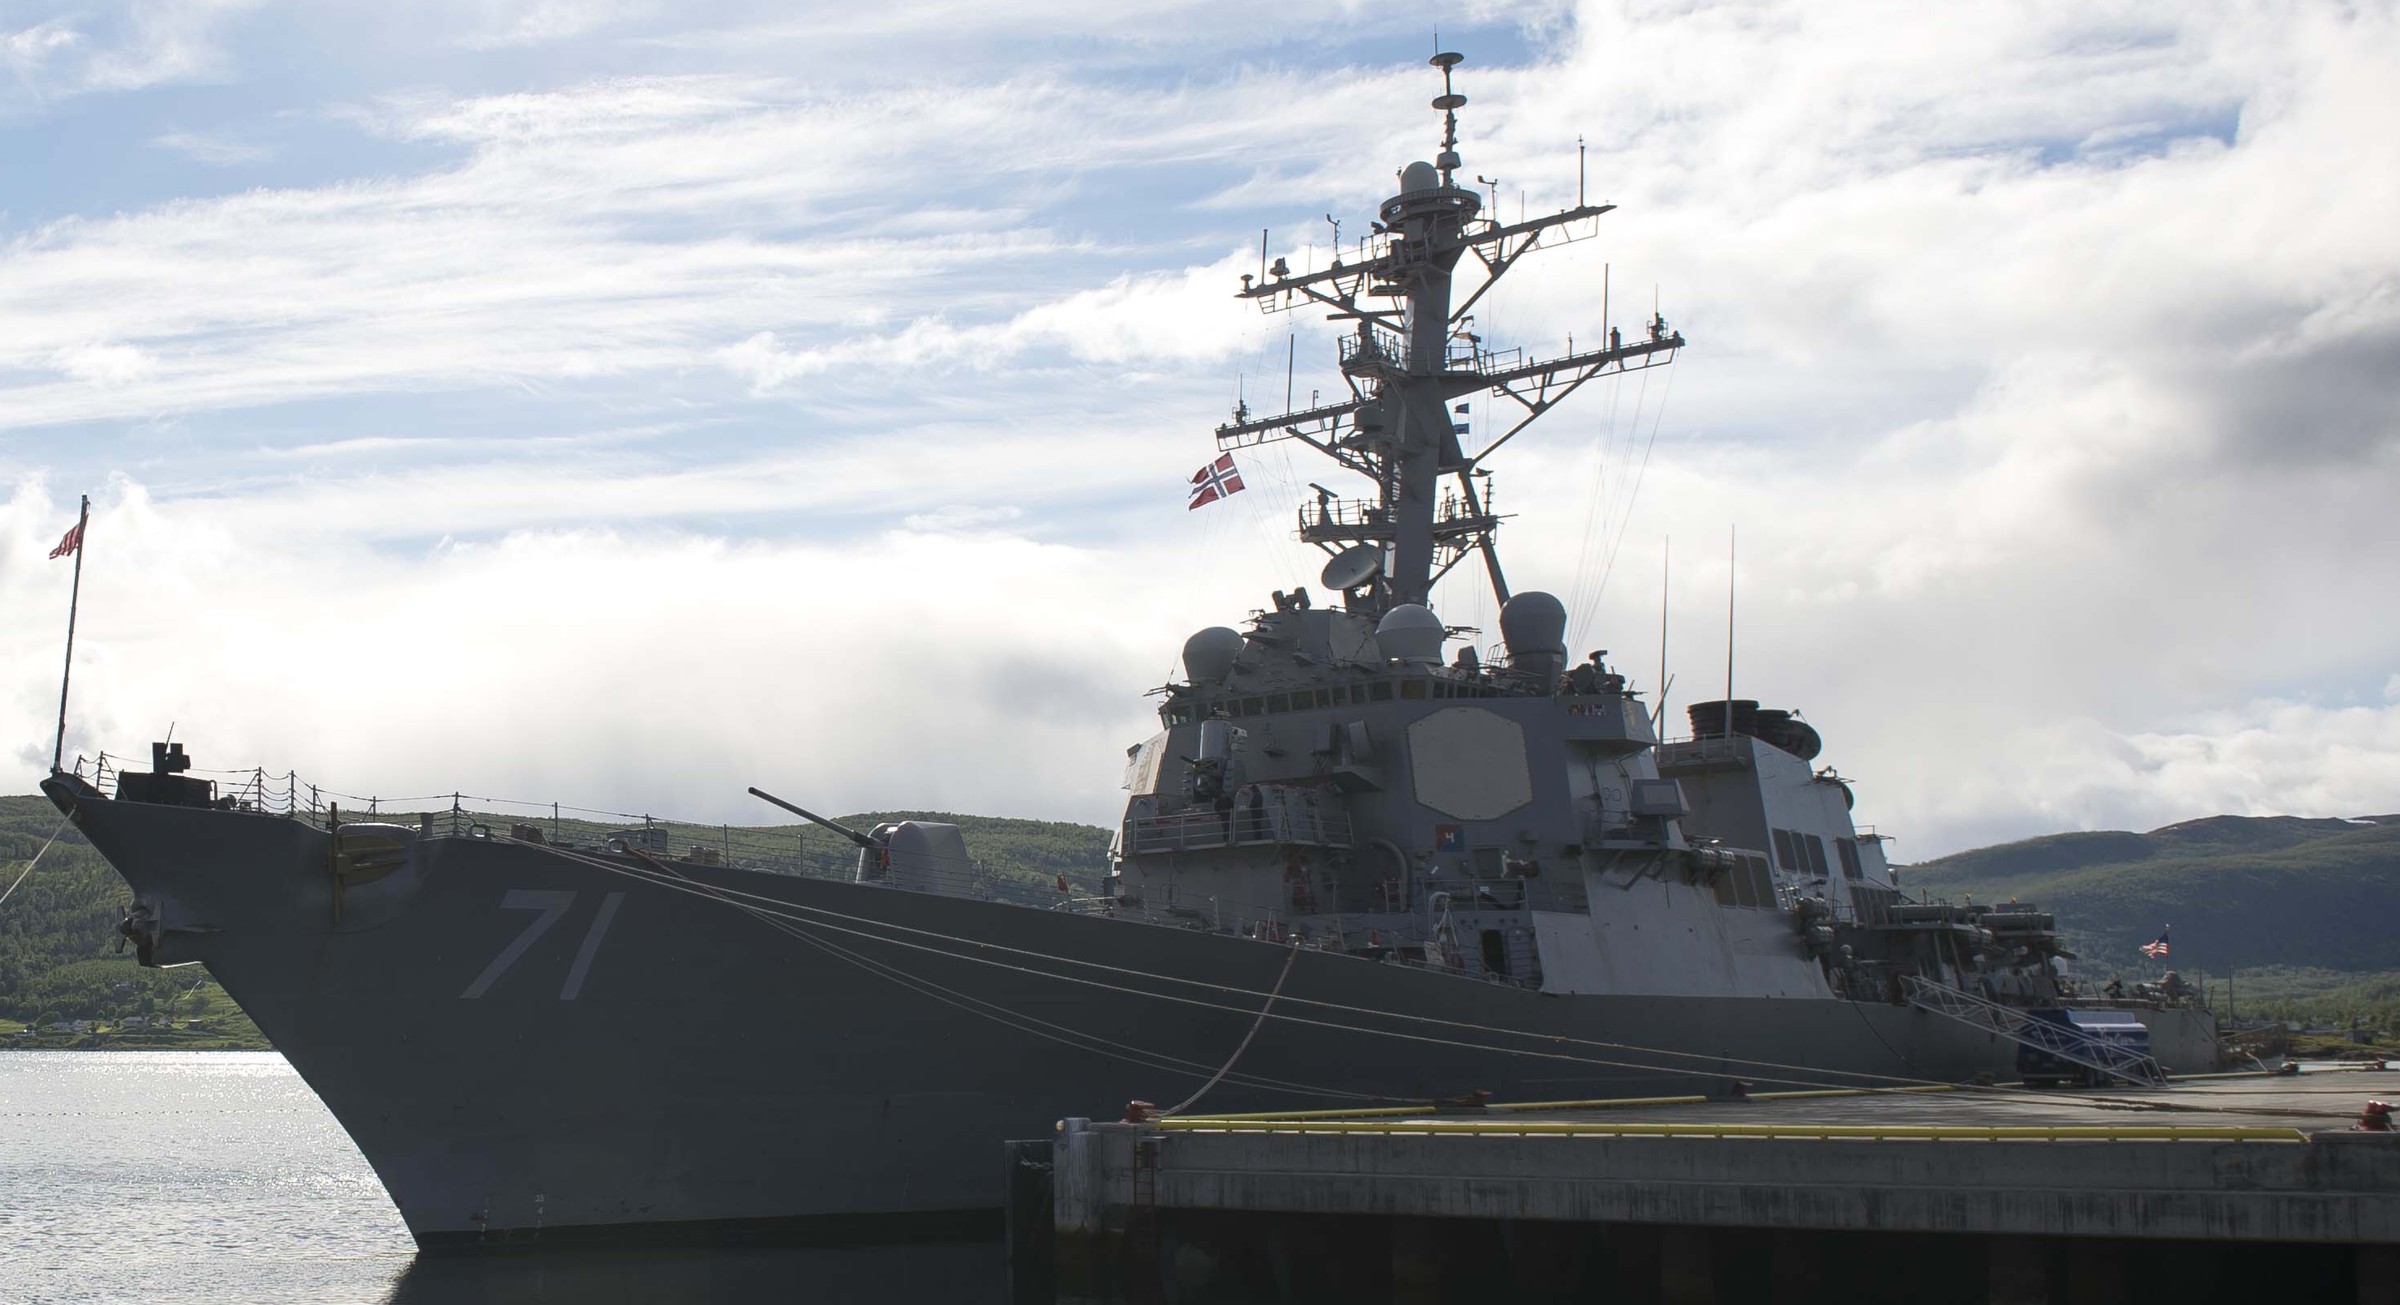 ddg-71 uss ross guided missile destroyer arleigh burke class aegis bmd 25 tromso norway